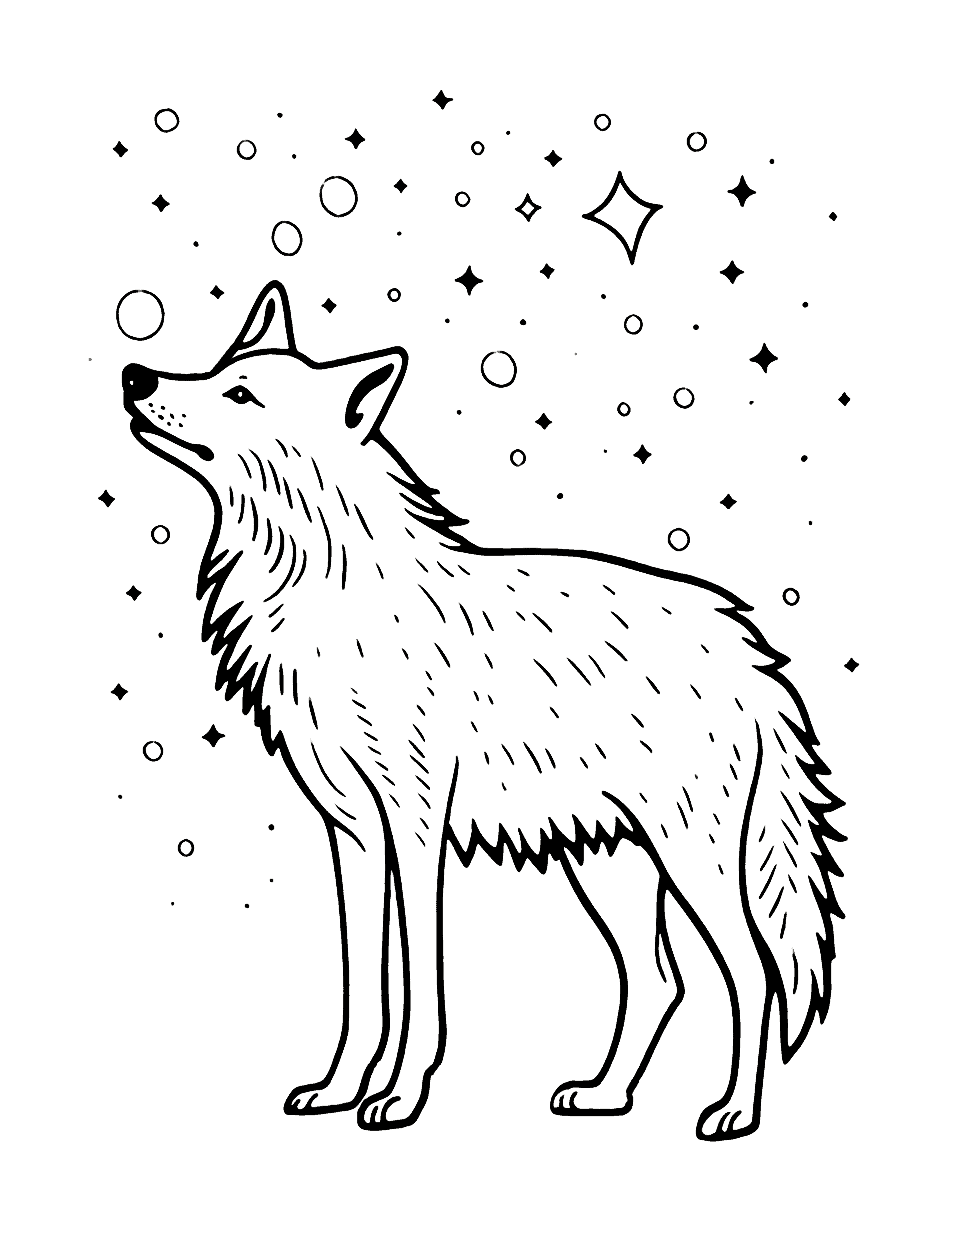 Wolf and Constellations Coloring Page - A wolf silhouette filled with constellations from the night sky.